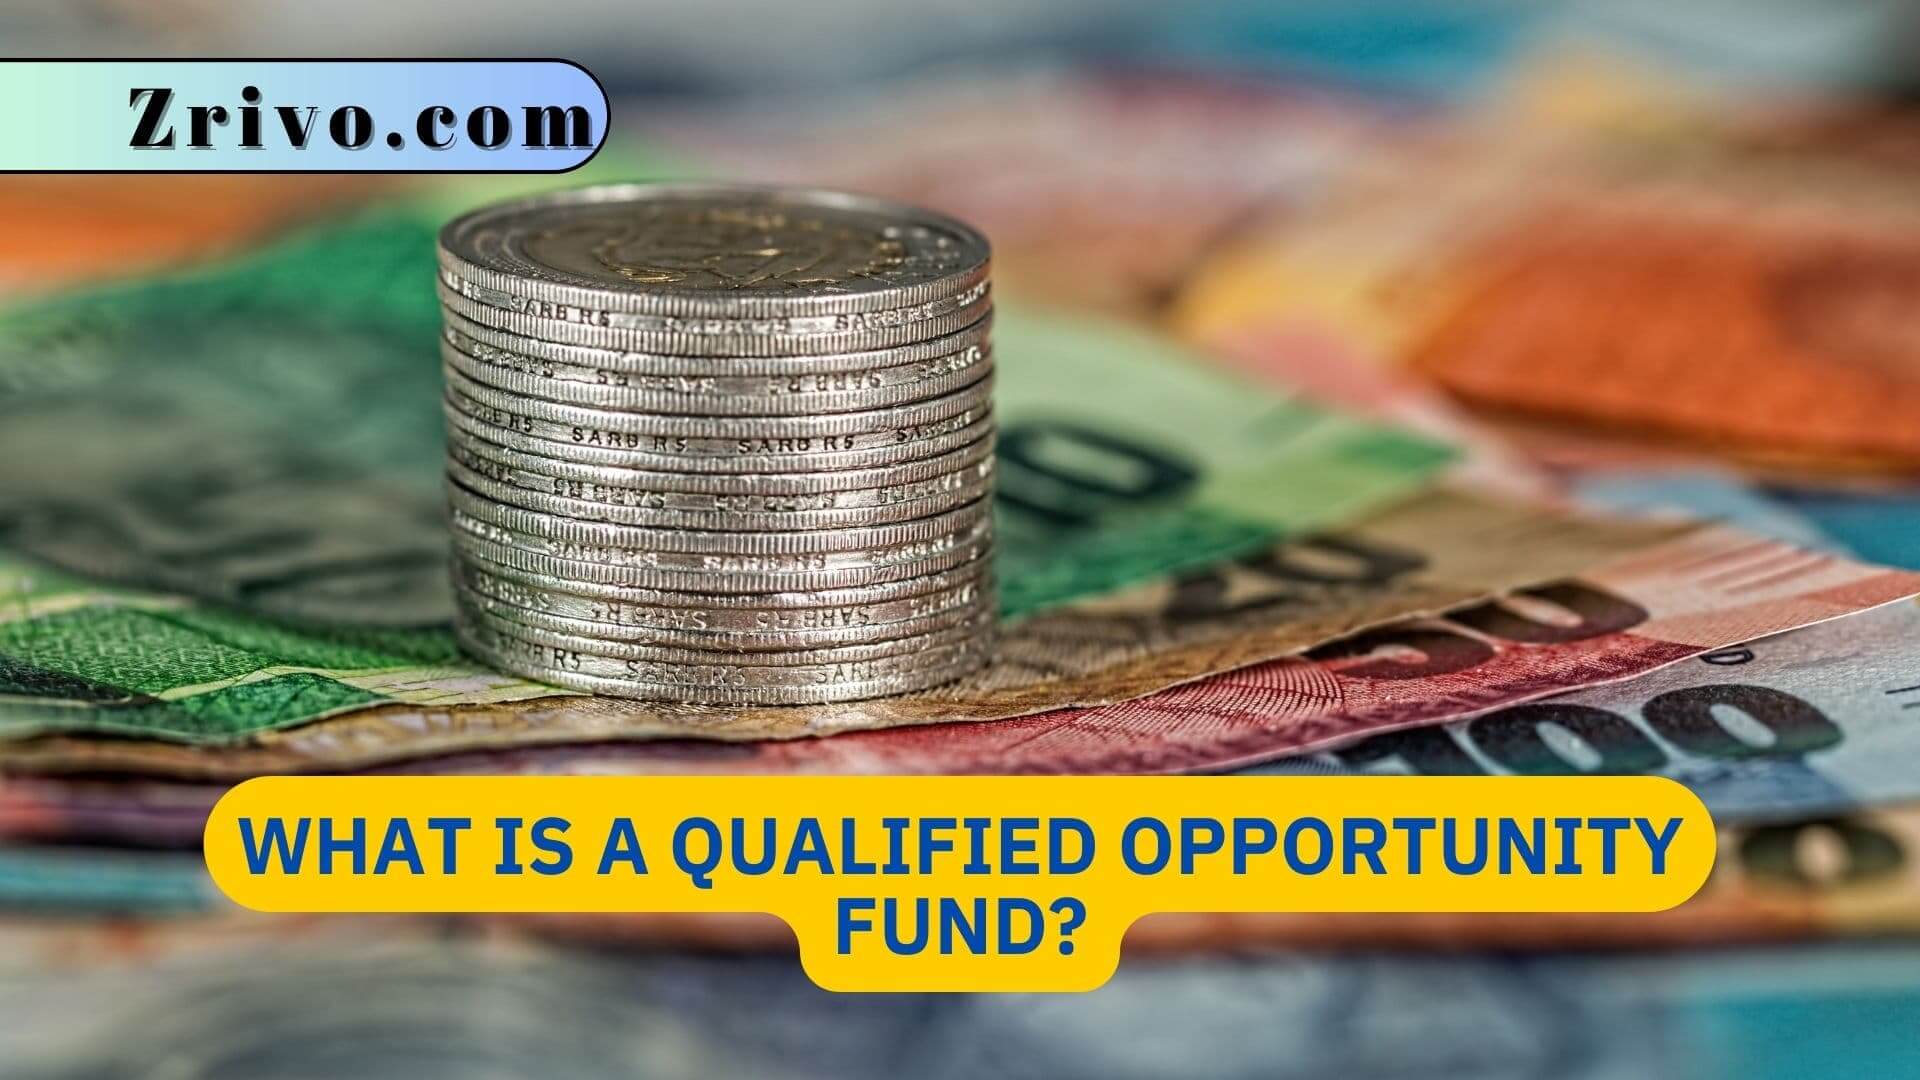 What is a Qualified Opportunity Fund